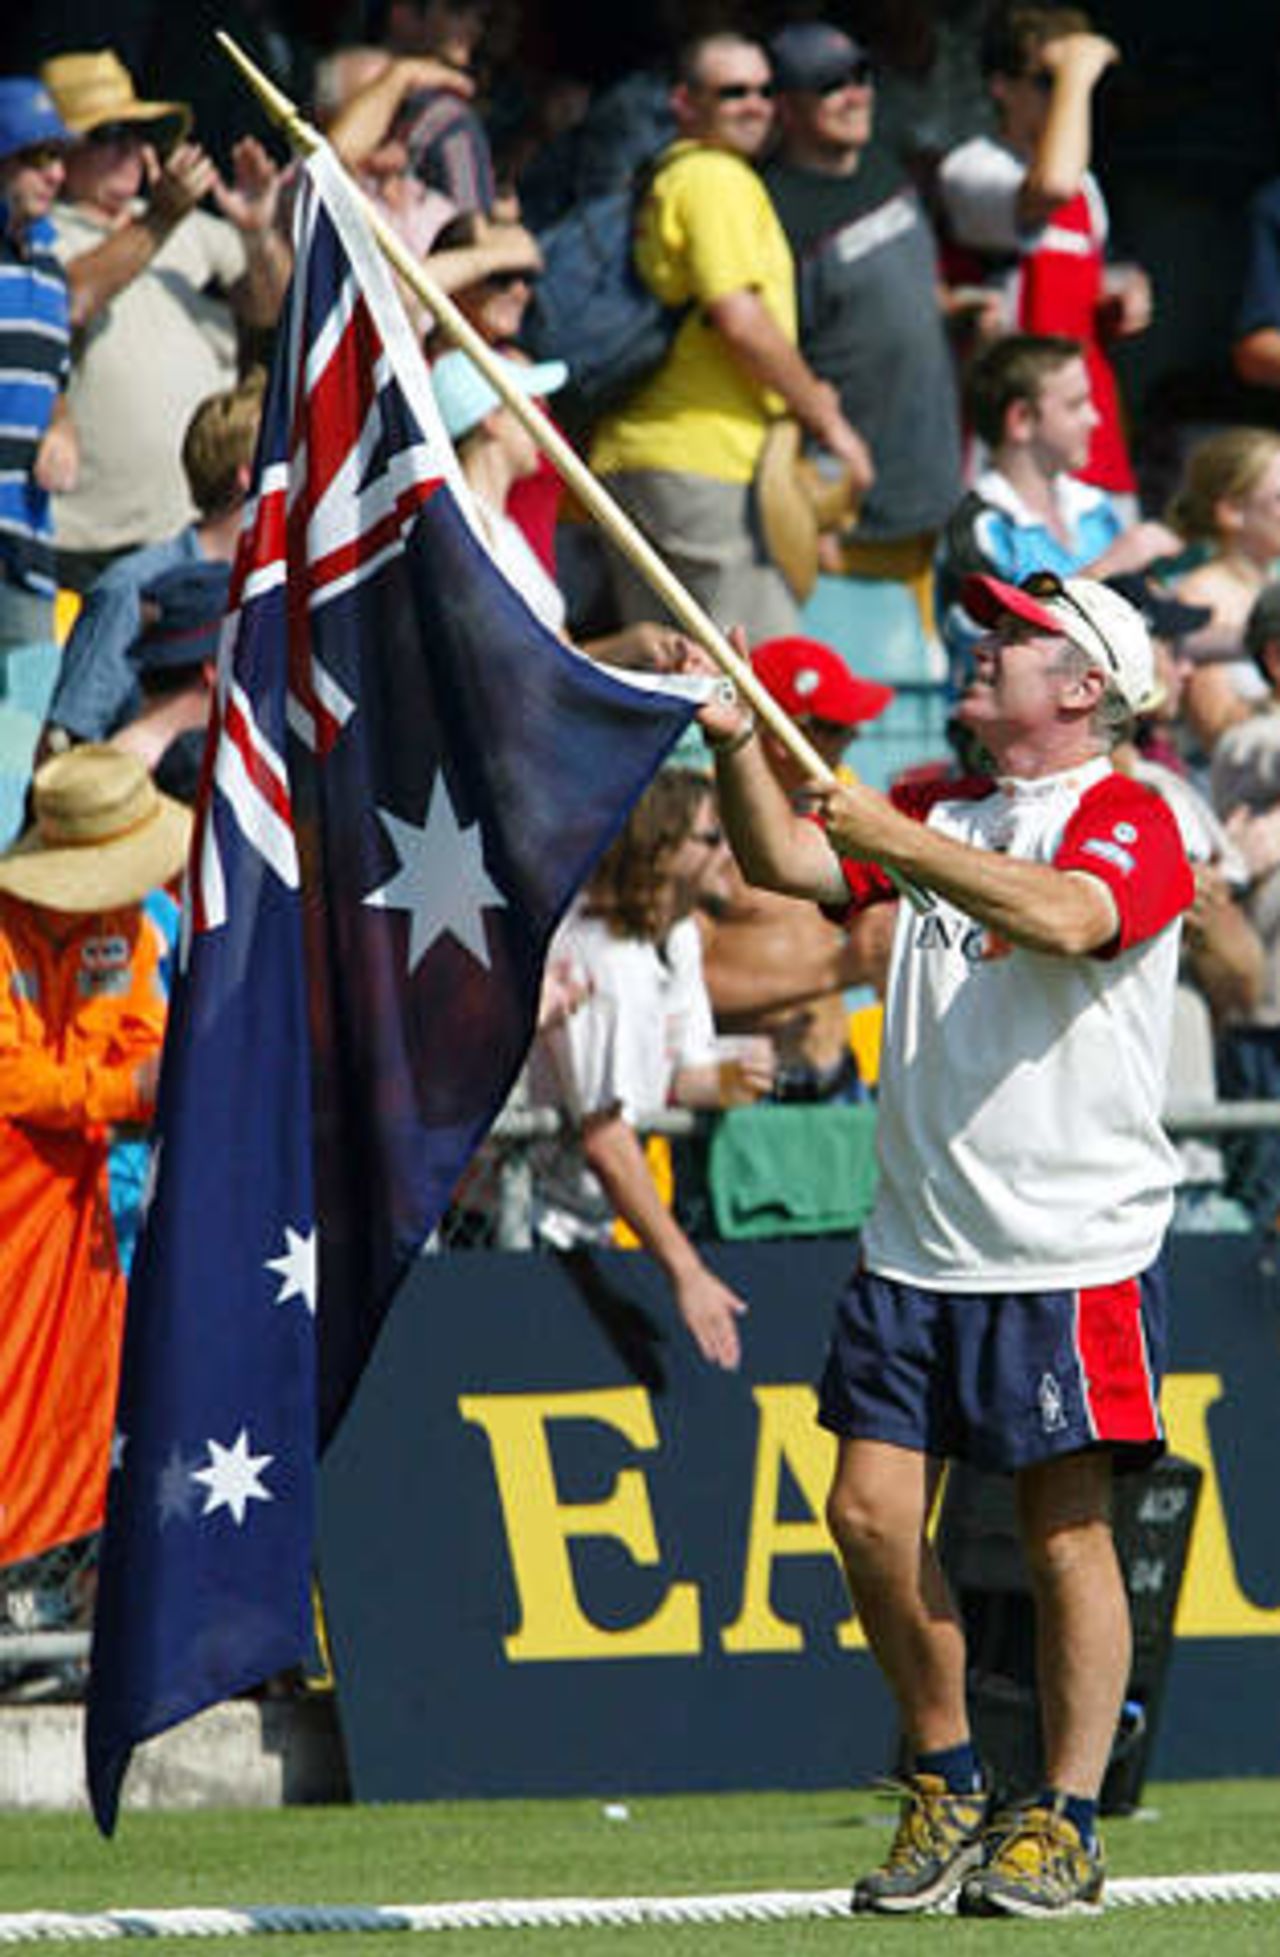 Former Australian captain Allan Border carries an Australian flag as he walks around the Gabba during the first day's play in the first Ashes test match in Brisbane November 7, 2002. Border was finishing a 1000 kilometre (621 mile) walk from Sydney to Brisbane raising money for charity, after being inspired by former England player Ian Botham's similar deed.